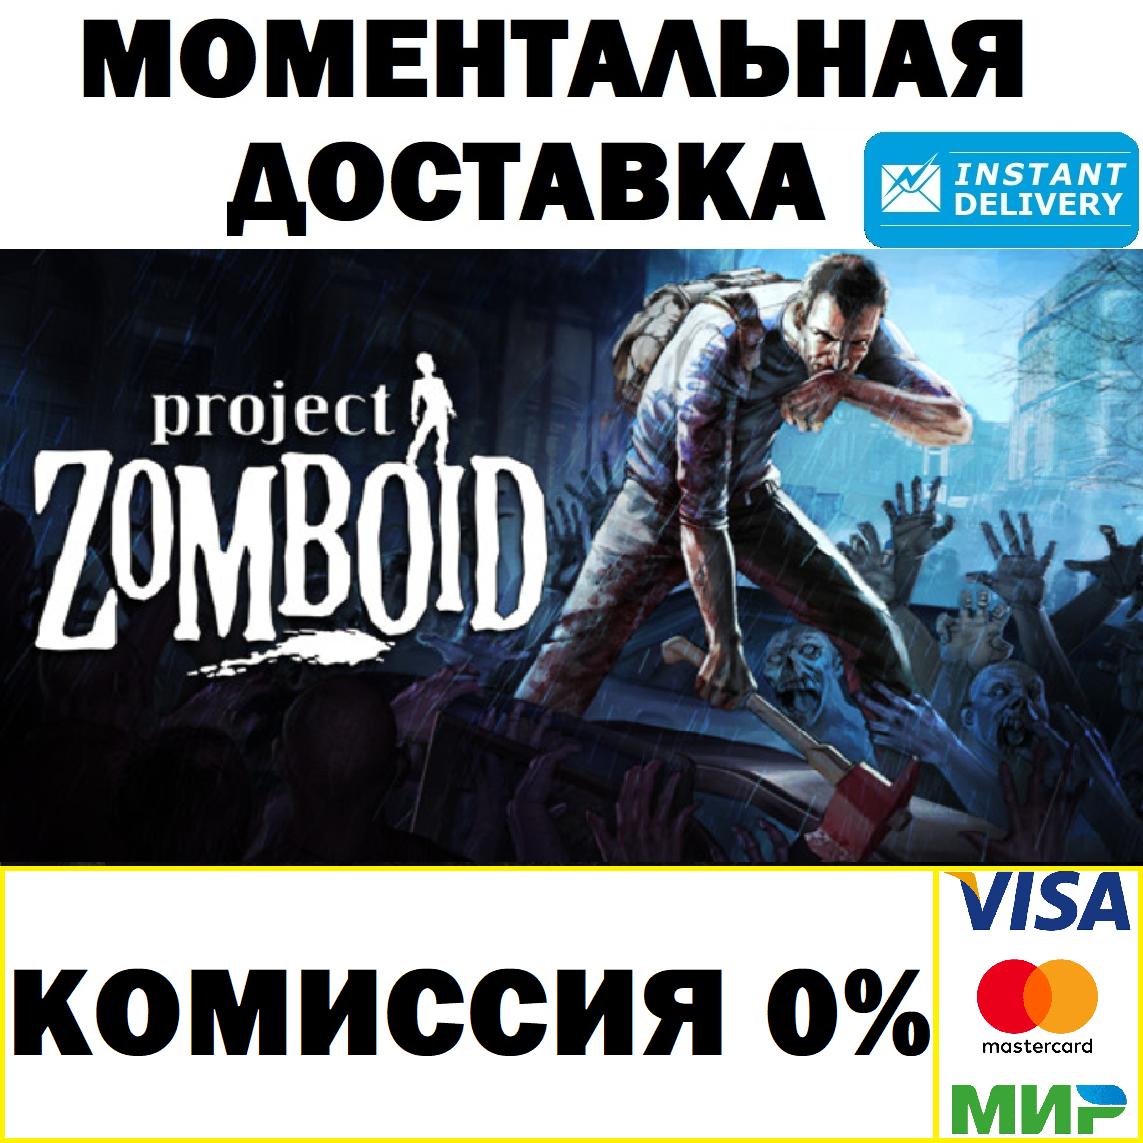 Project Zomboid (RU/CIS) - steam gift + present